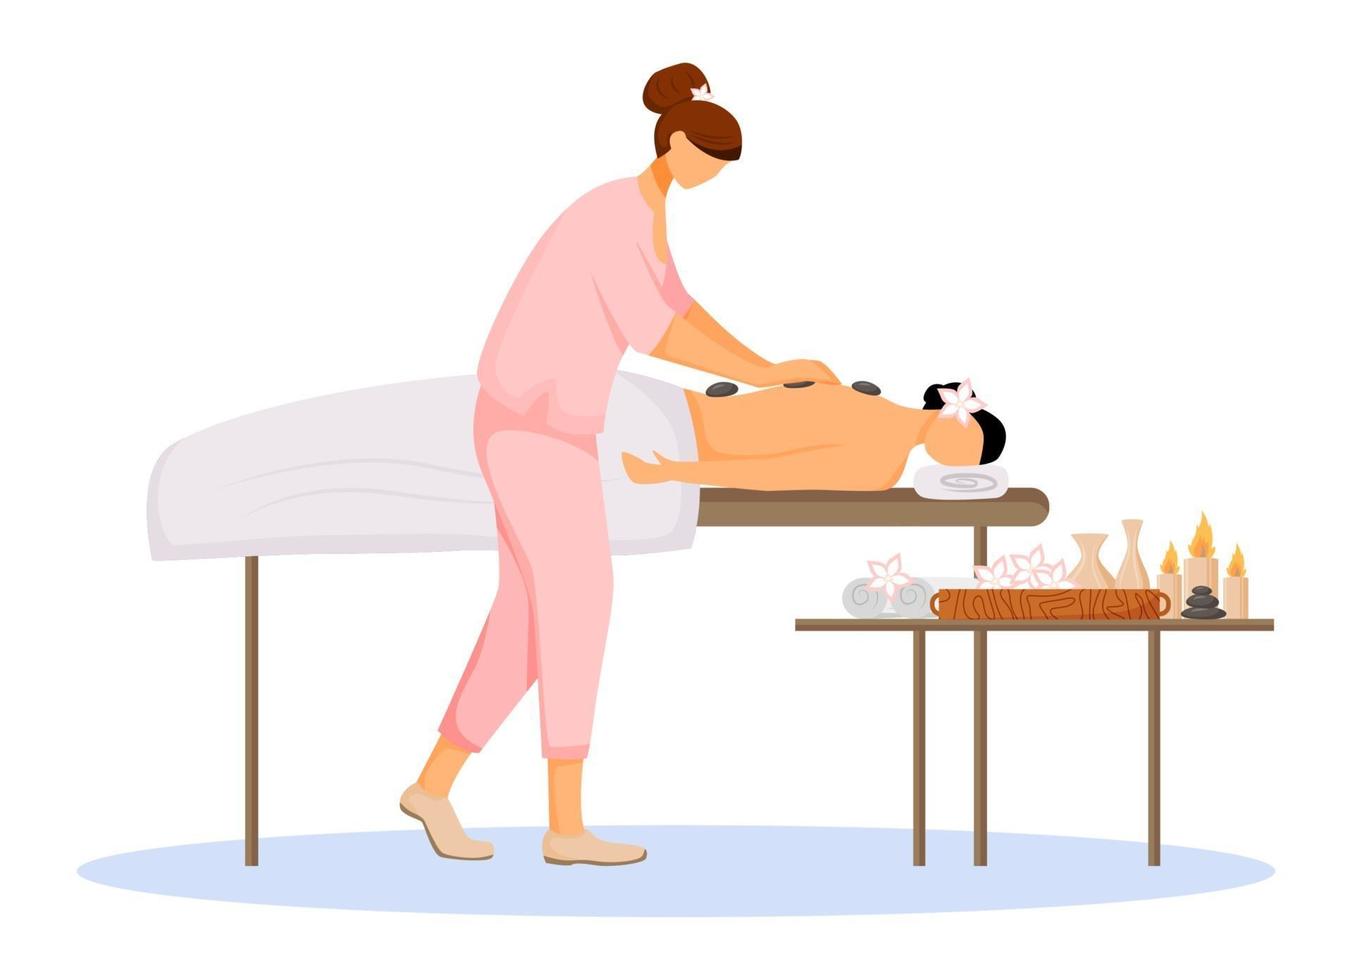 Masseuse in uniform flat color vector illustration. Spa salon, body treatment, relaxation. Hotel pampering session. Stone massage therapist and client isolated cartoon characters on white background